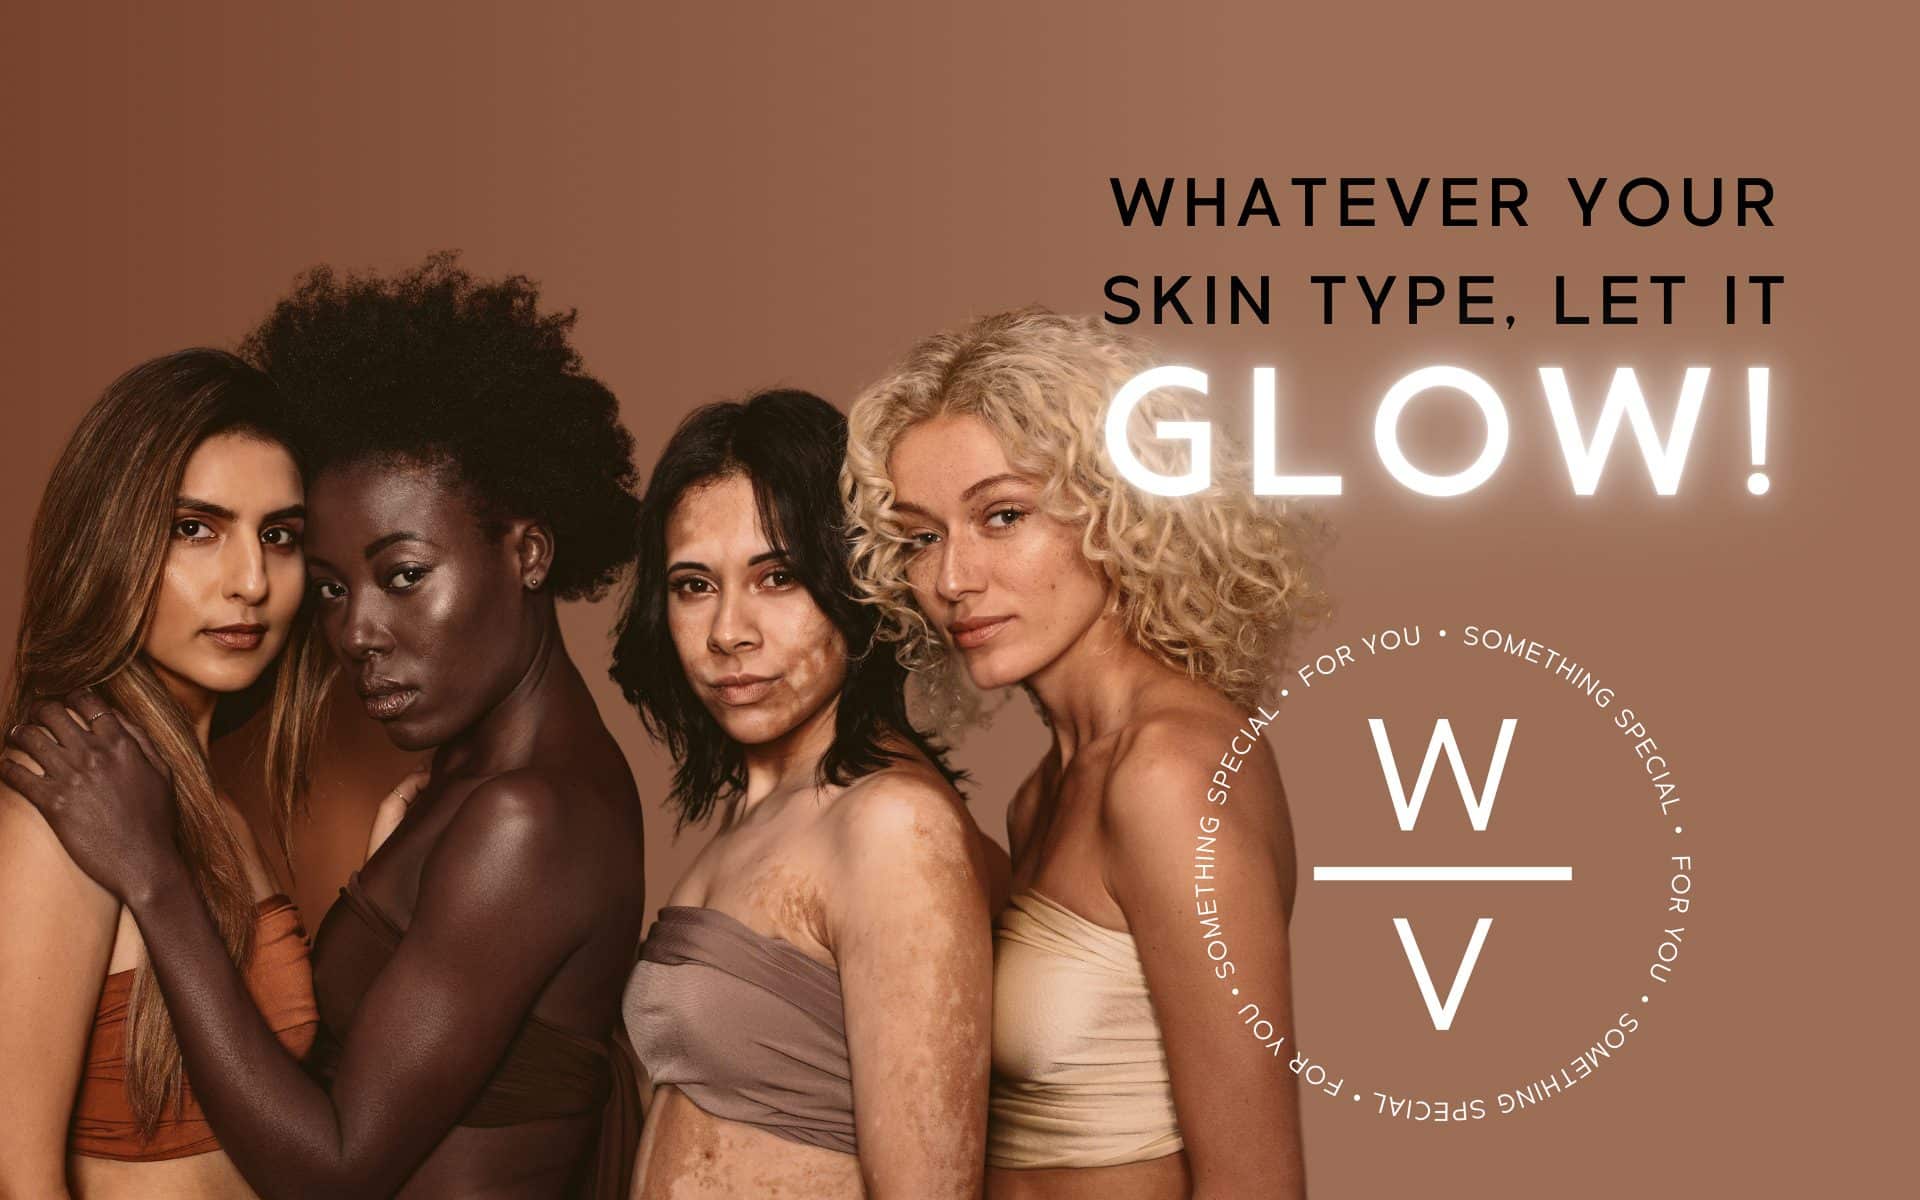 Wecke Voigts for you - Make your Skin glow